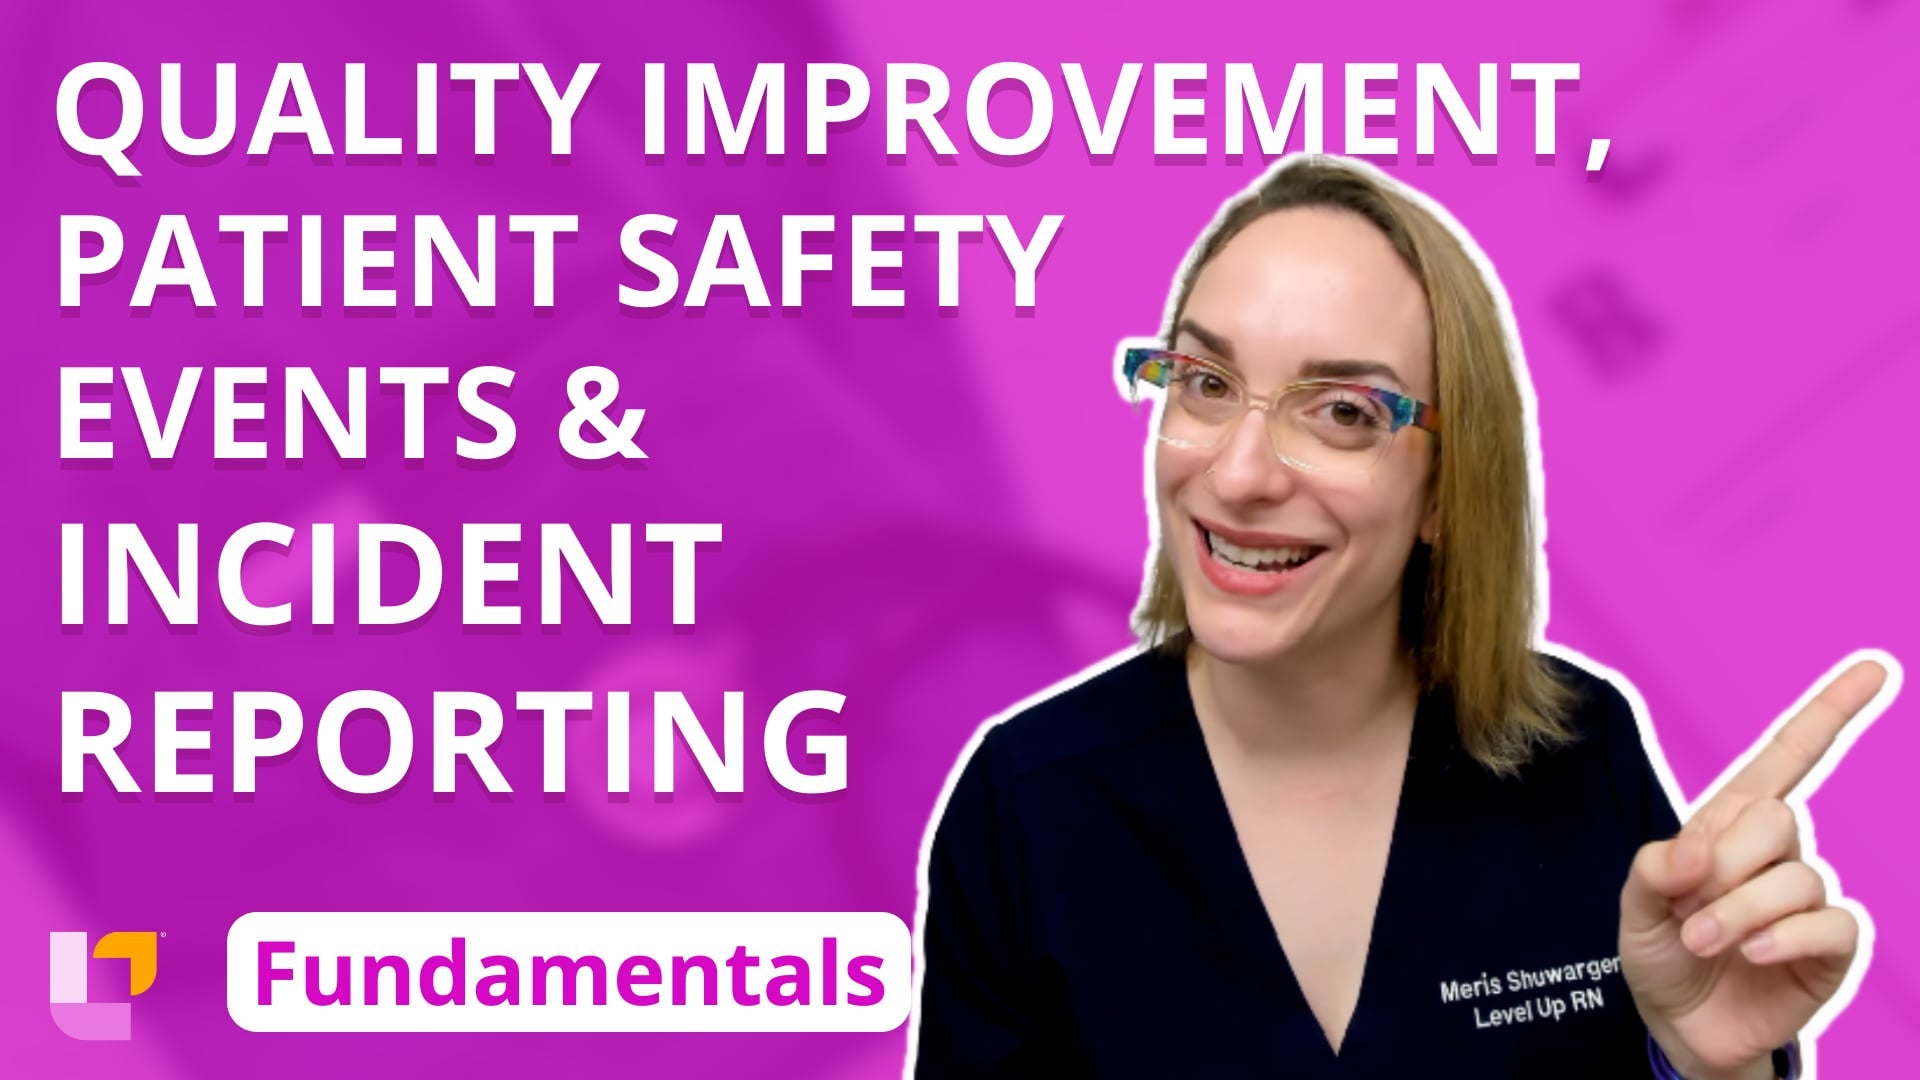 Fundamentals - Leadership, part 7: Quality Improvement, Patient Safety Events, Incident Reporting - LevelUpRN